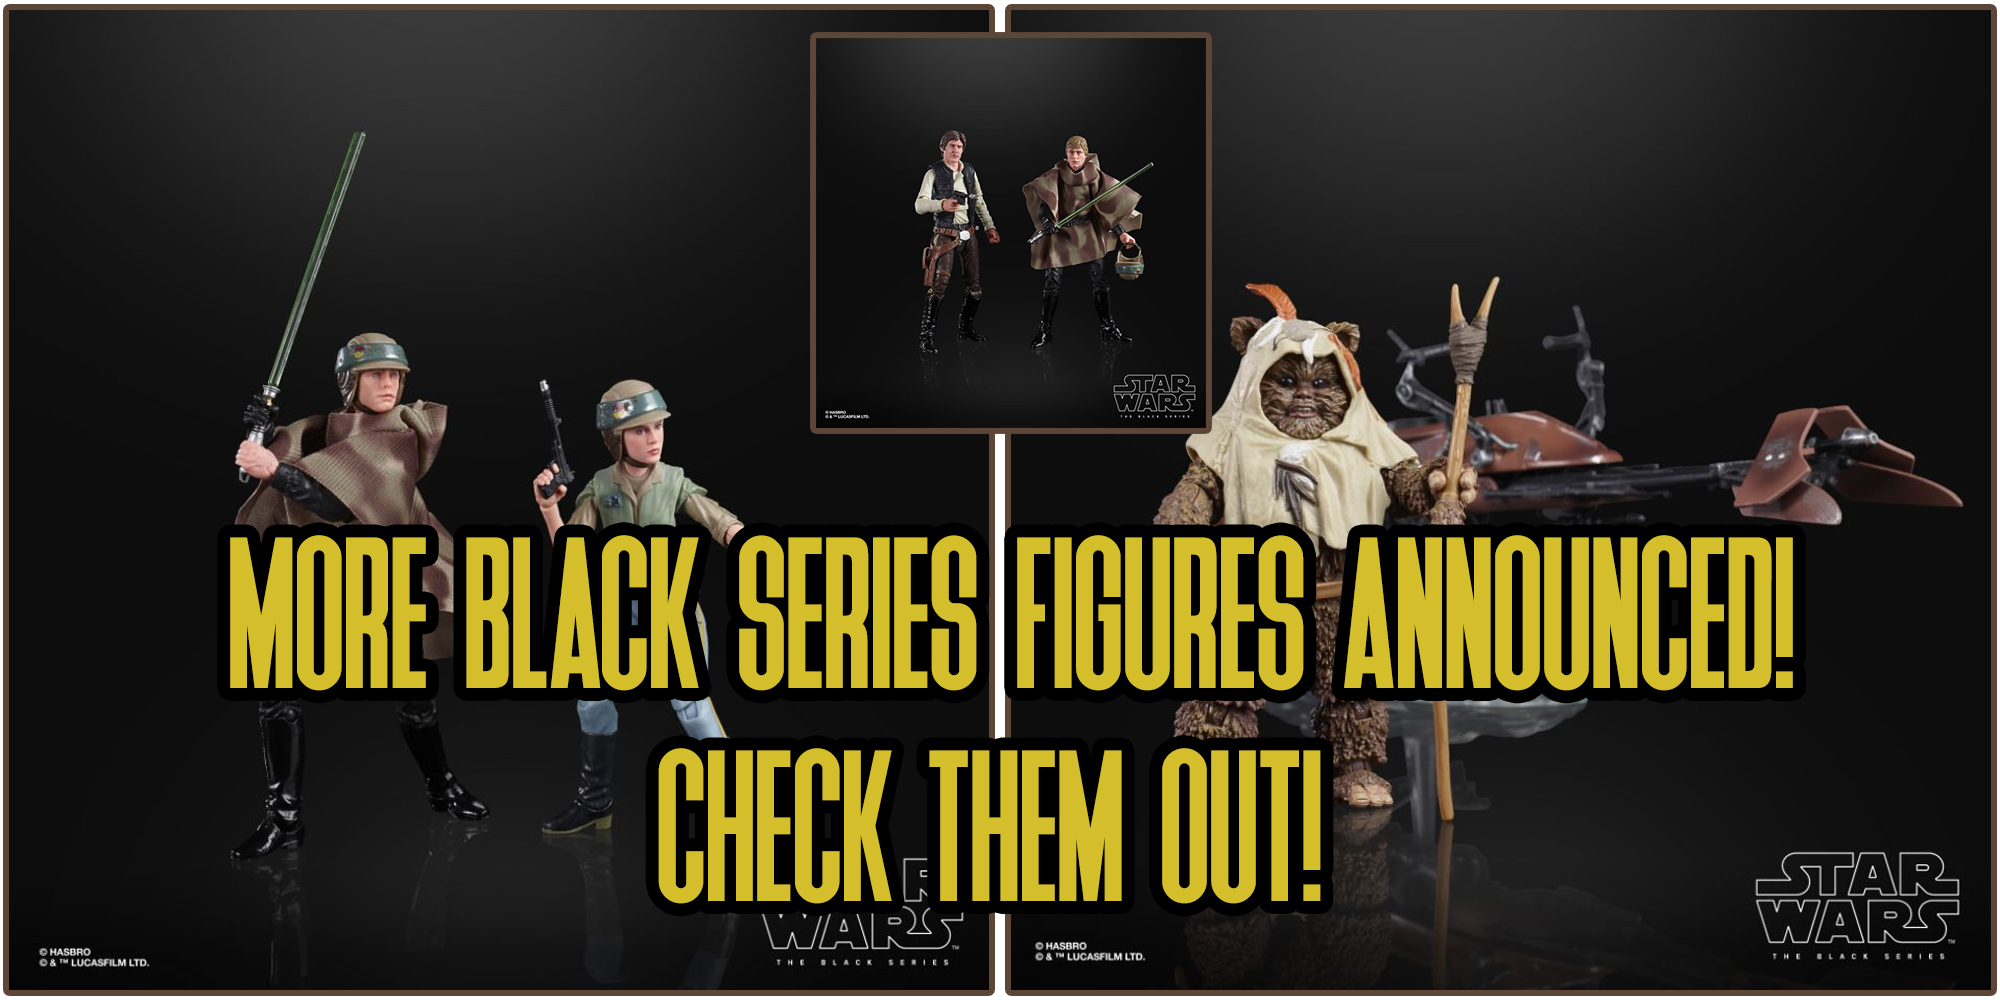 Endor Themed 4-Pack Coming To The Black Series!